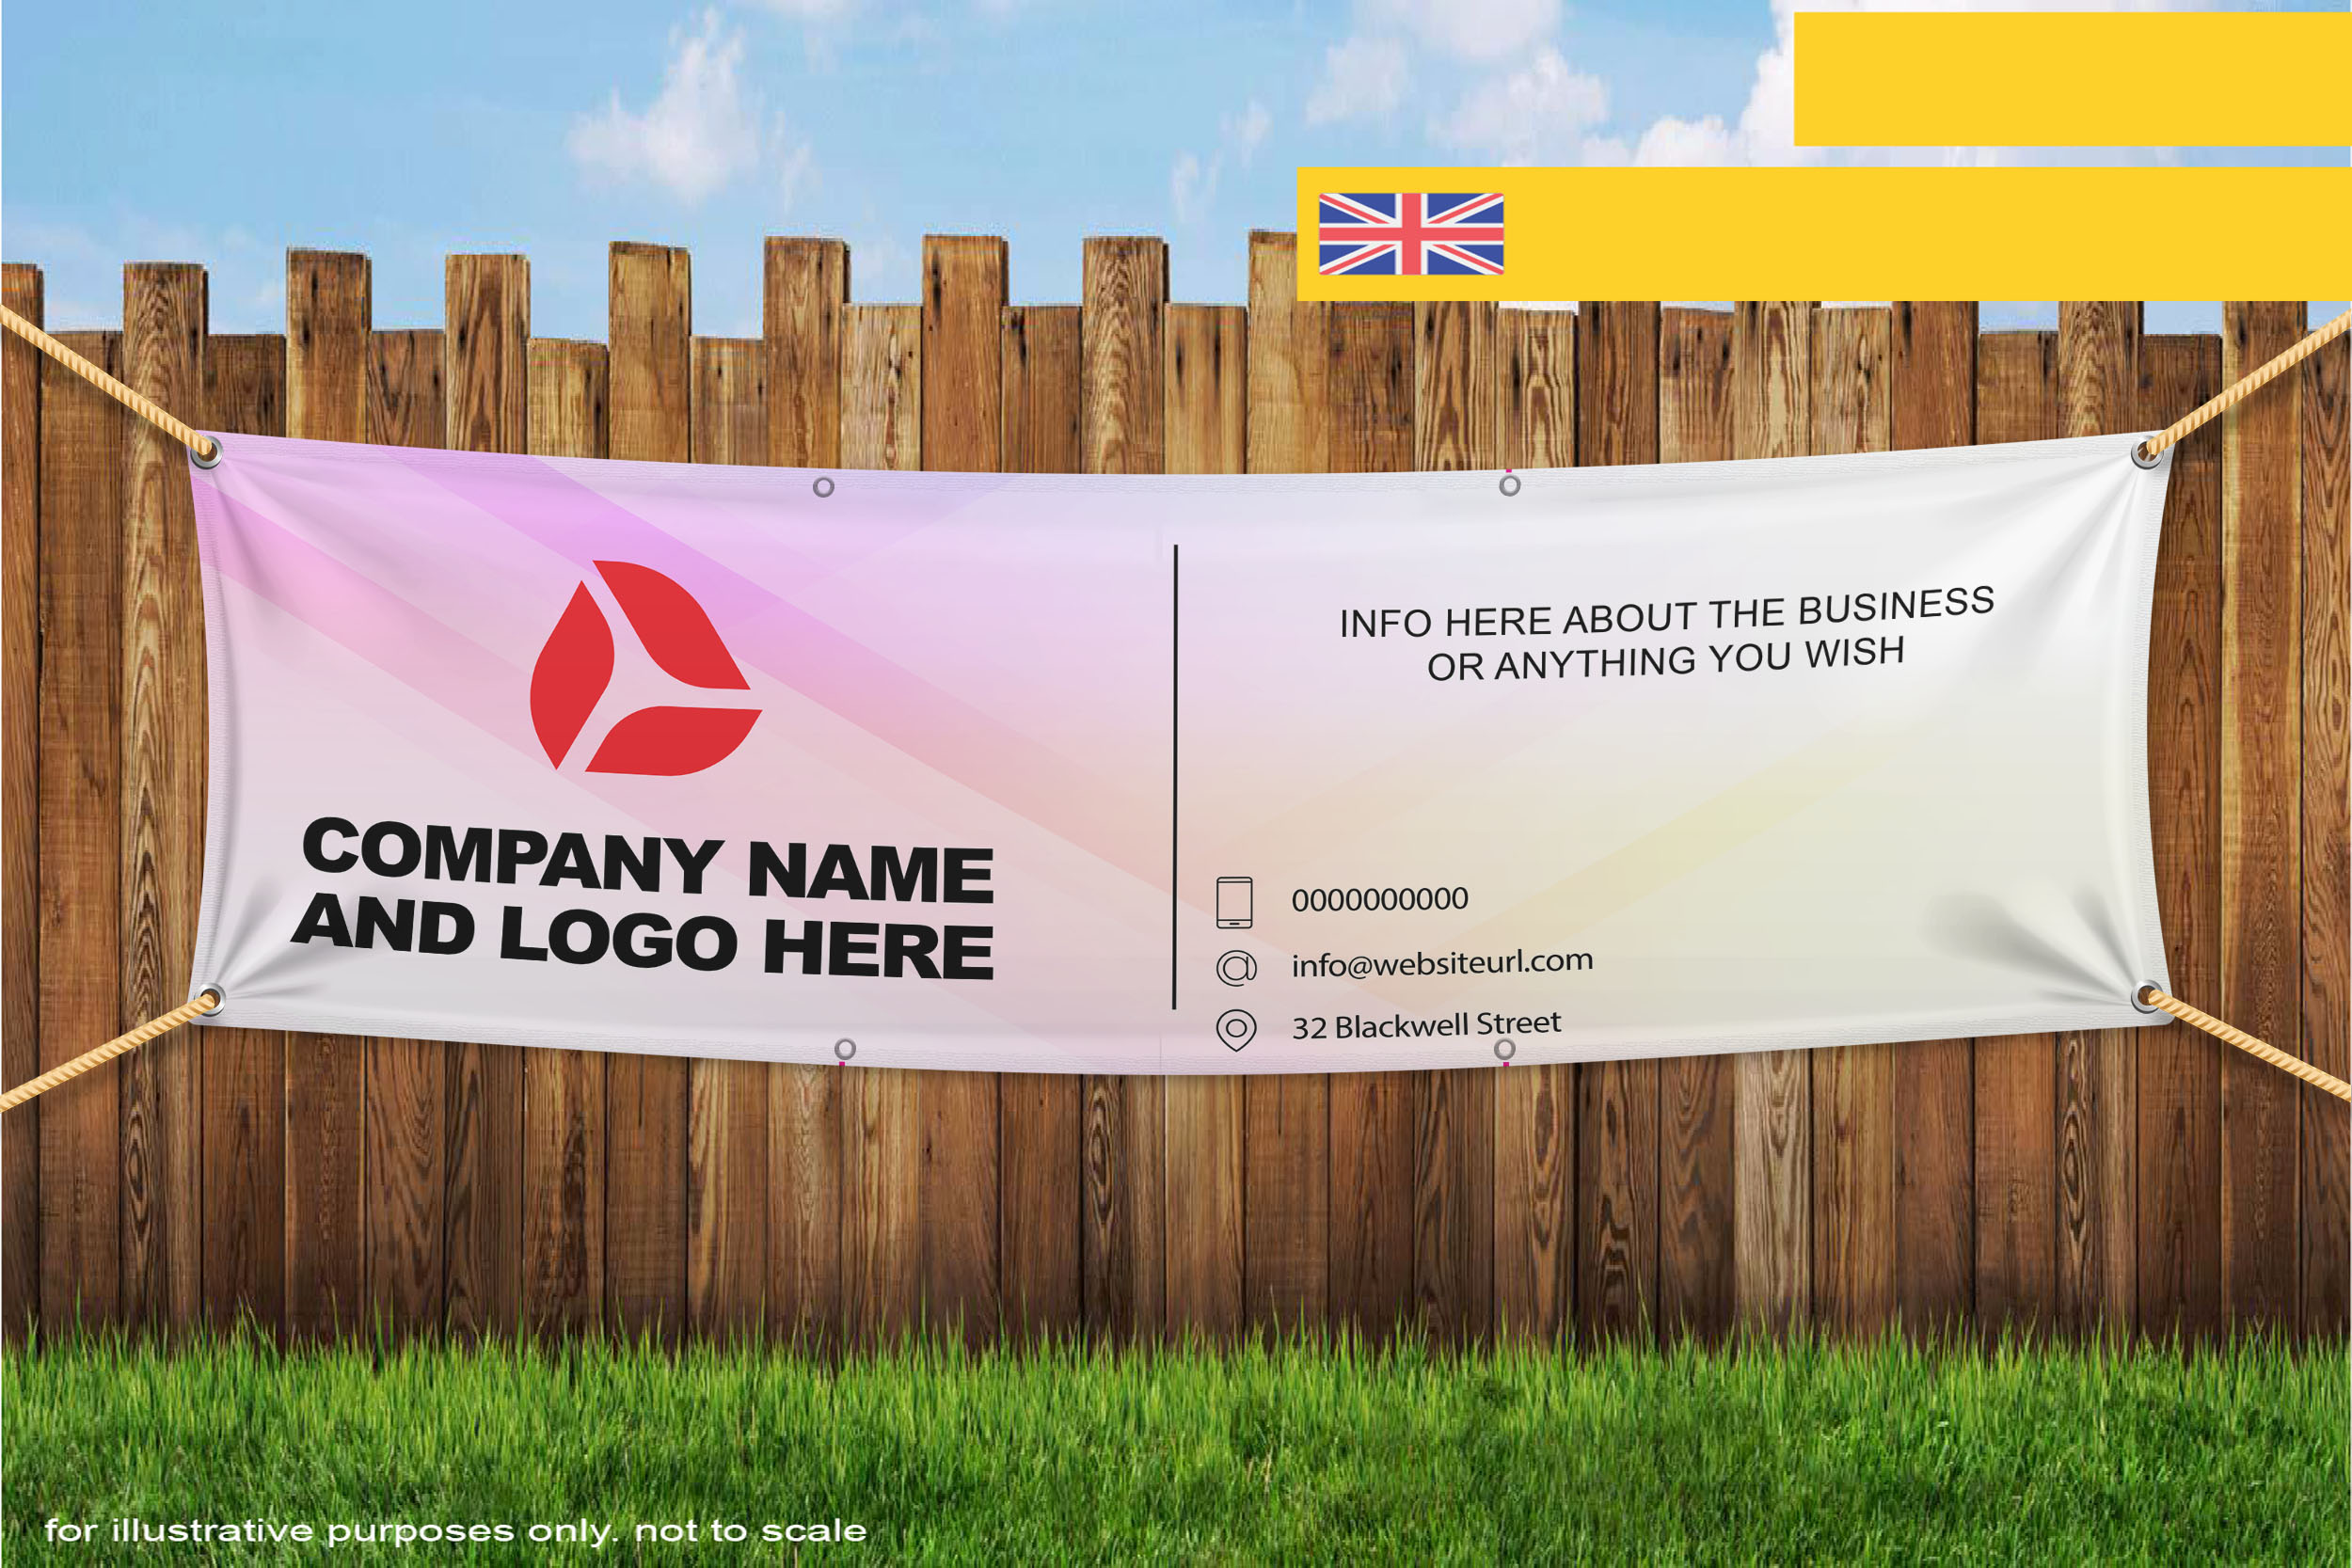 your-custom-company-business-banner-diy-signwriting